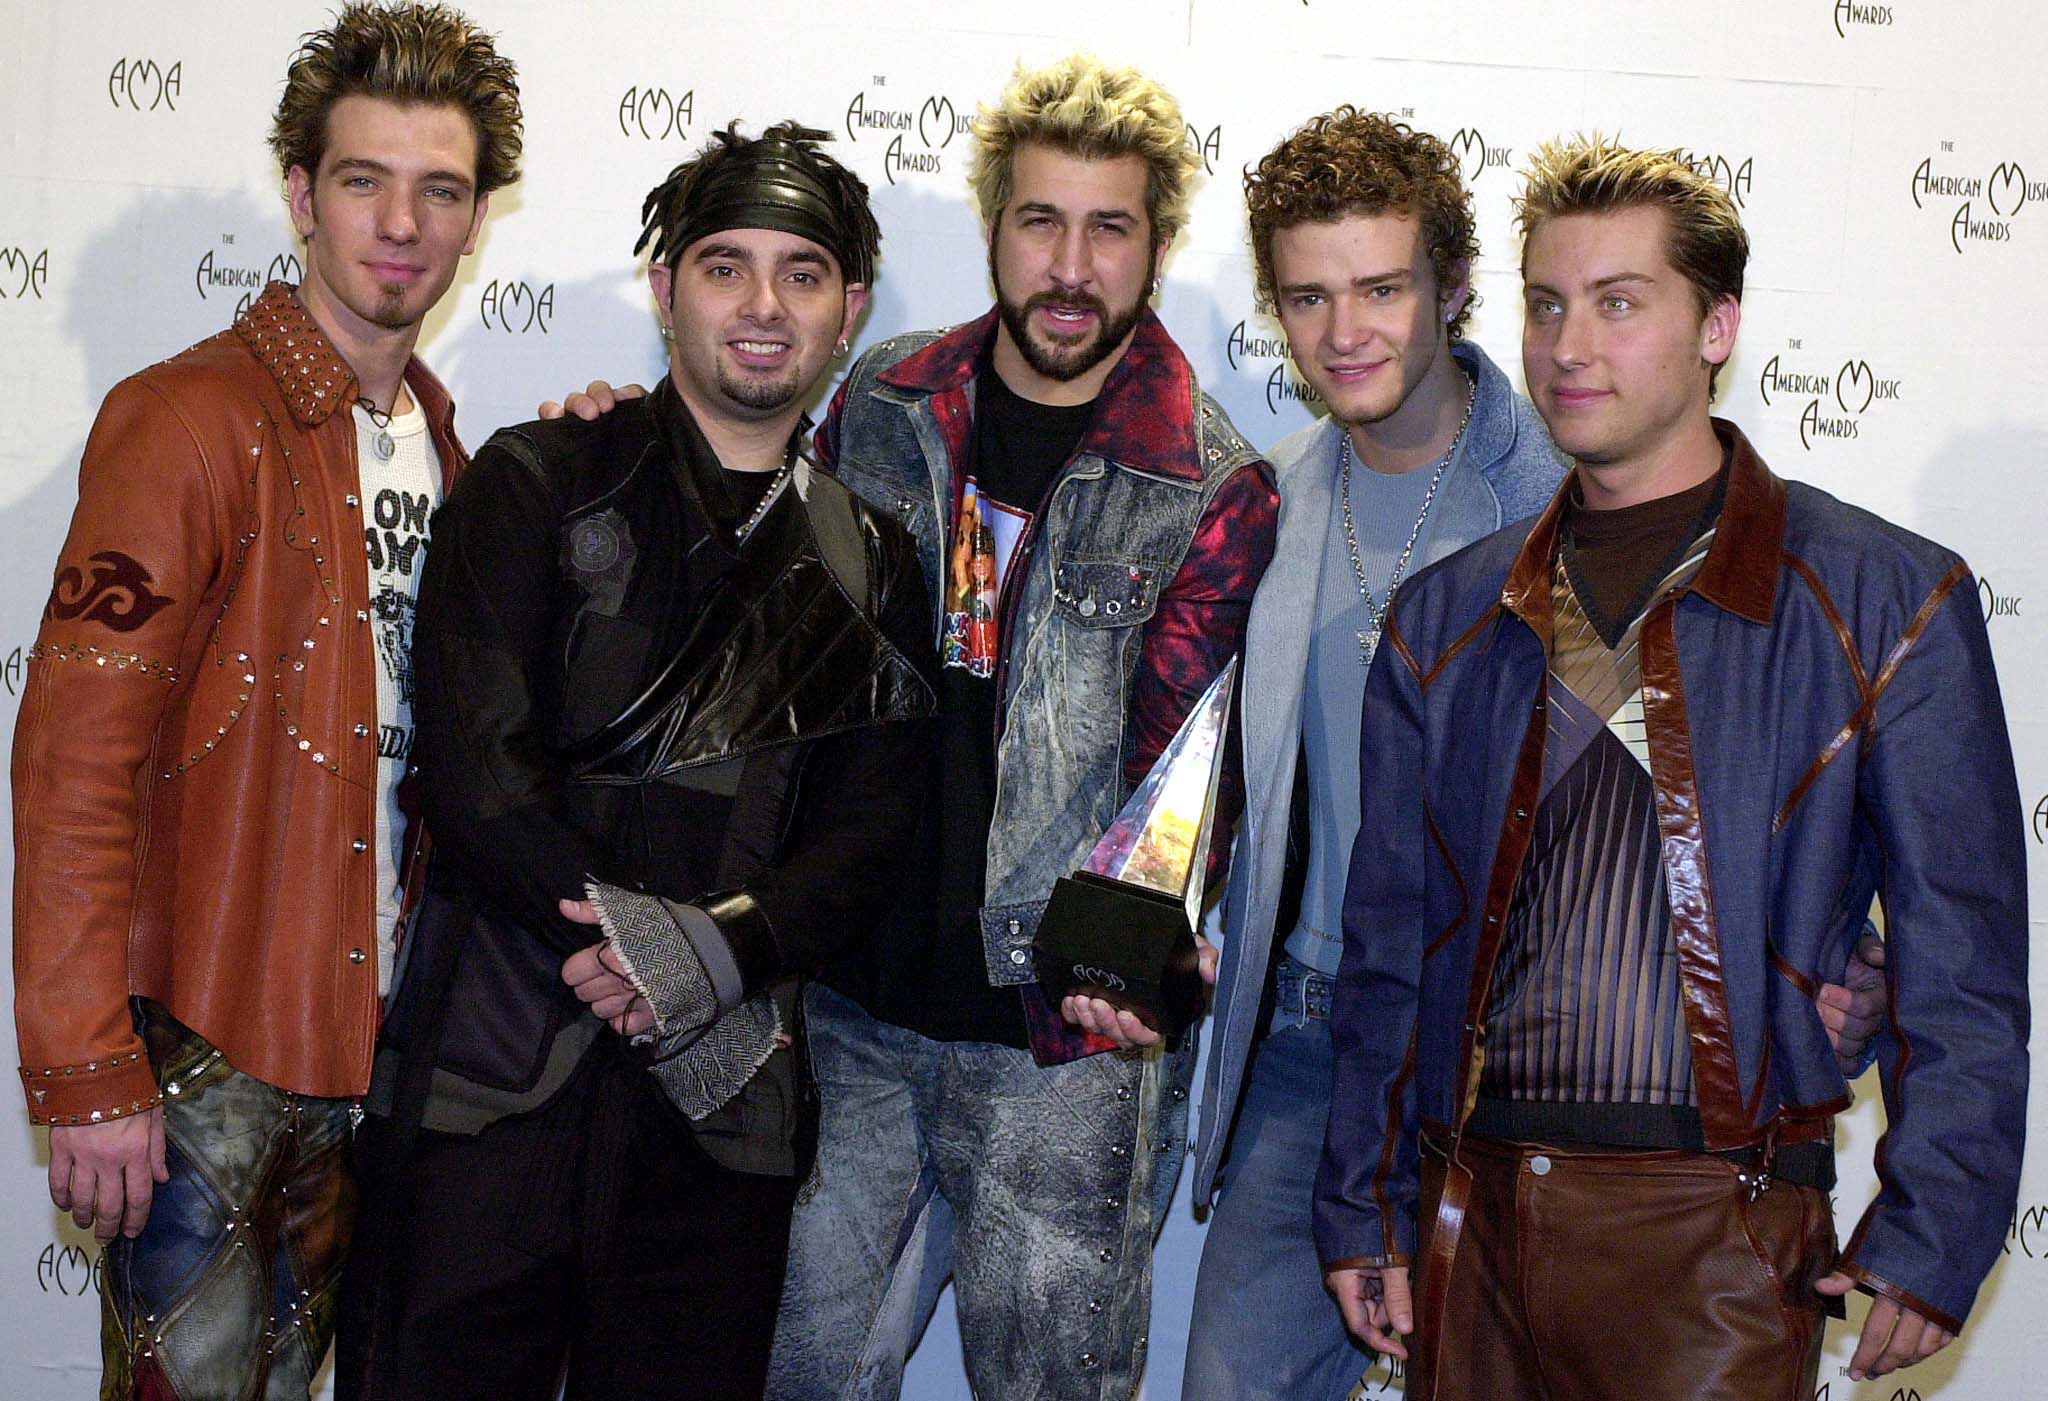 19 Of The Best Spiky Hairstyles From The Early 2000s — PHOTOS